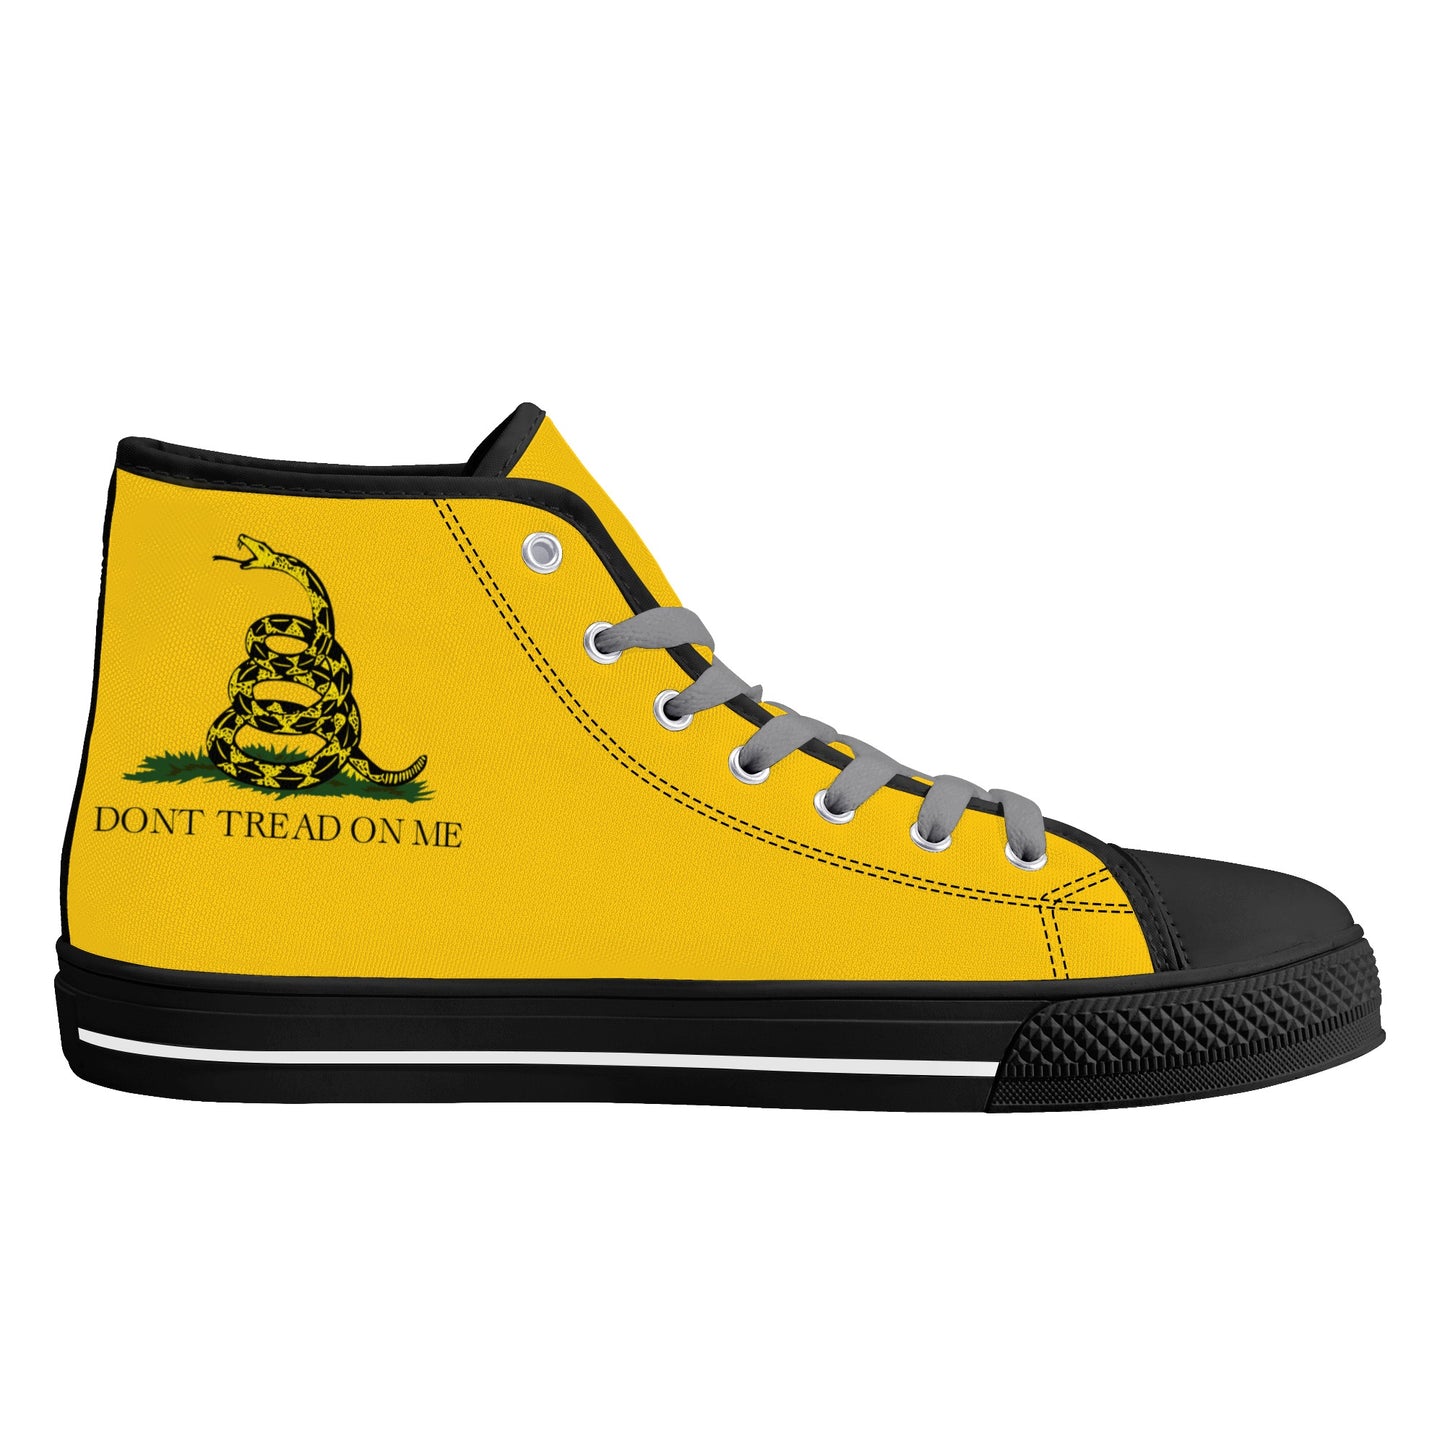 Don't Tread on Me, Mens Canvas High Top